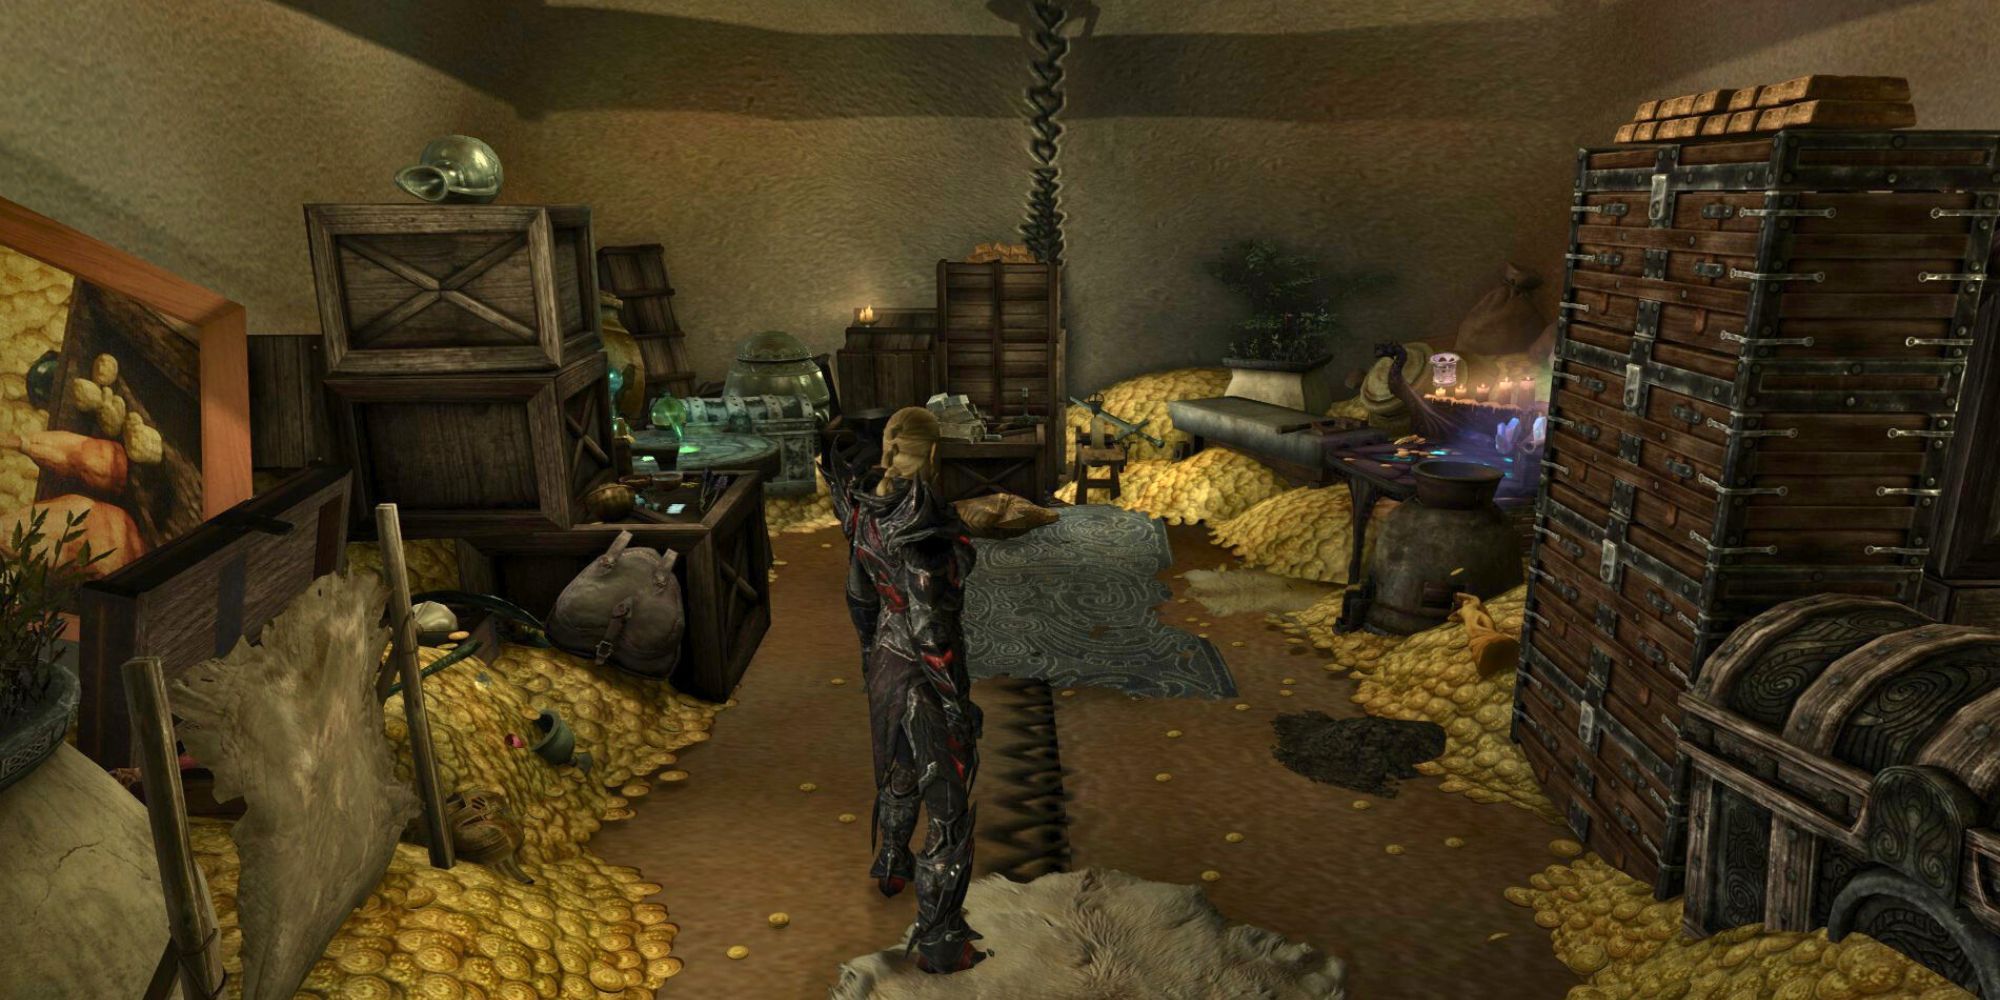 The dragonborn stands inside the Haven Bag, with various chests and piles of gold scattered across the space